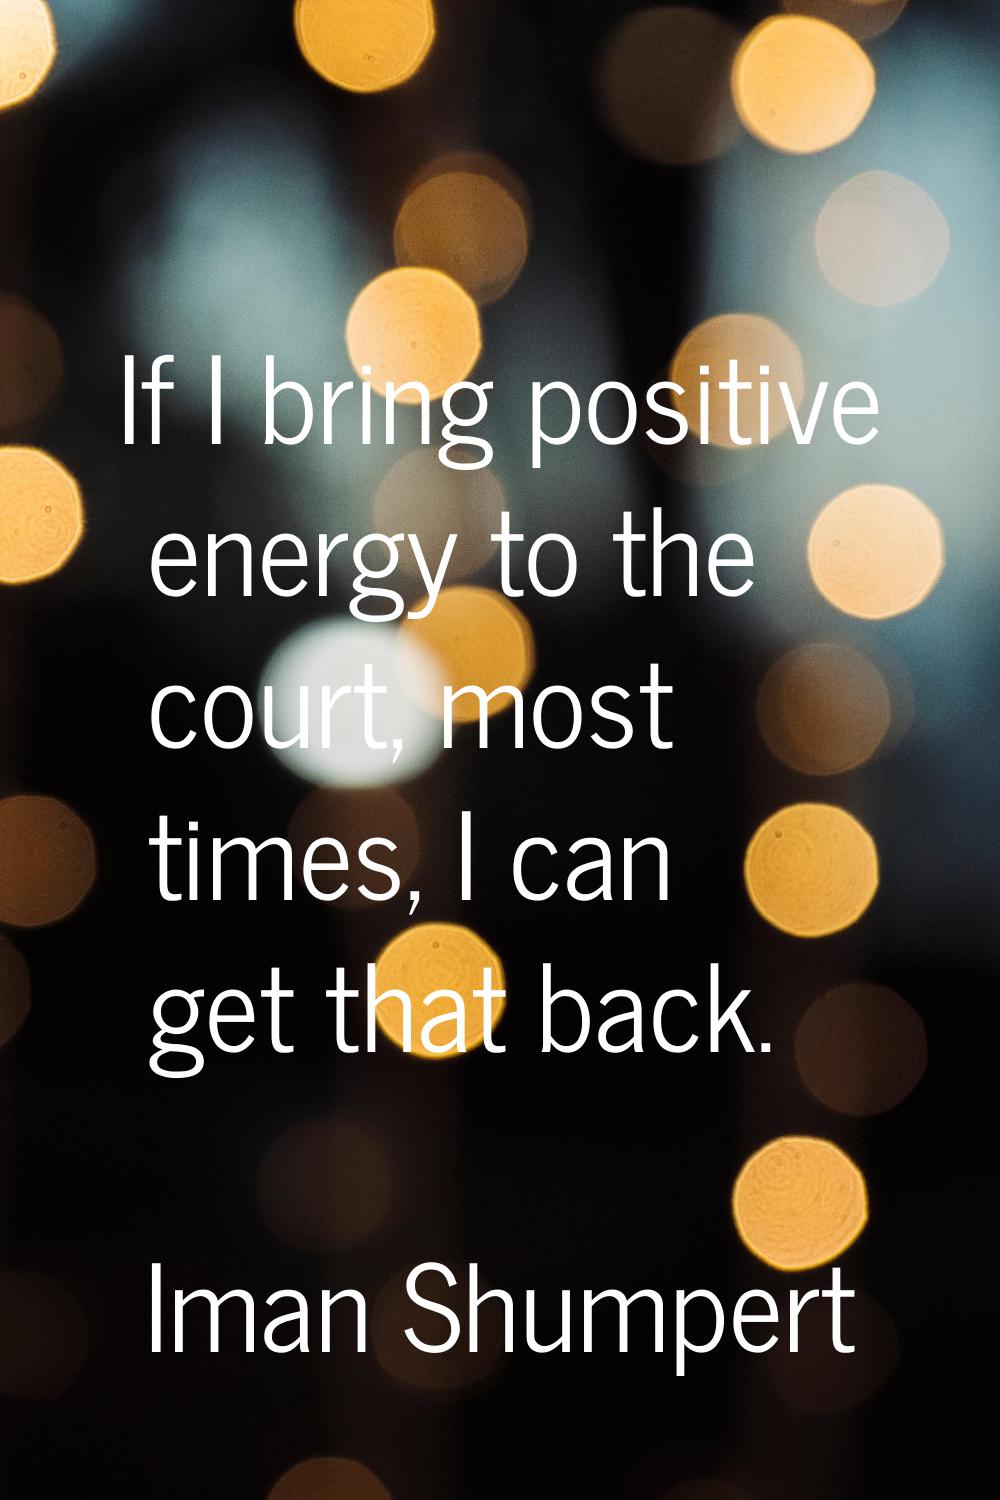 If I bring positive energy to the court, most times, I can get that back.